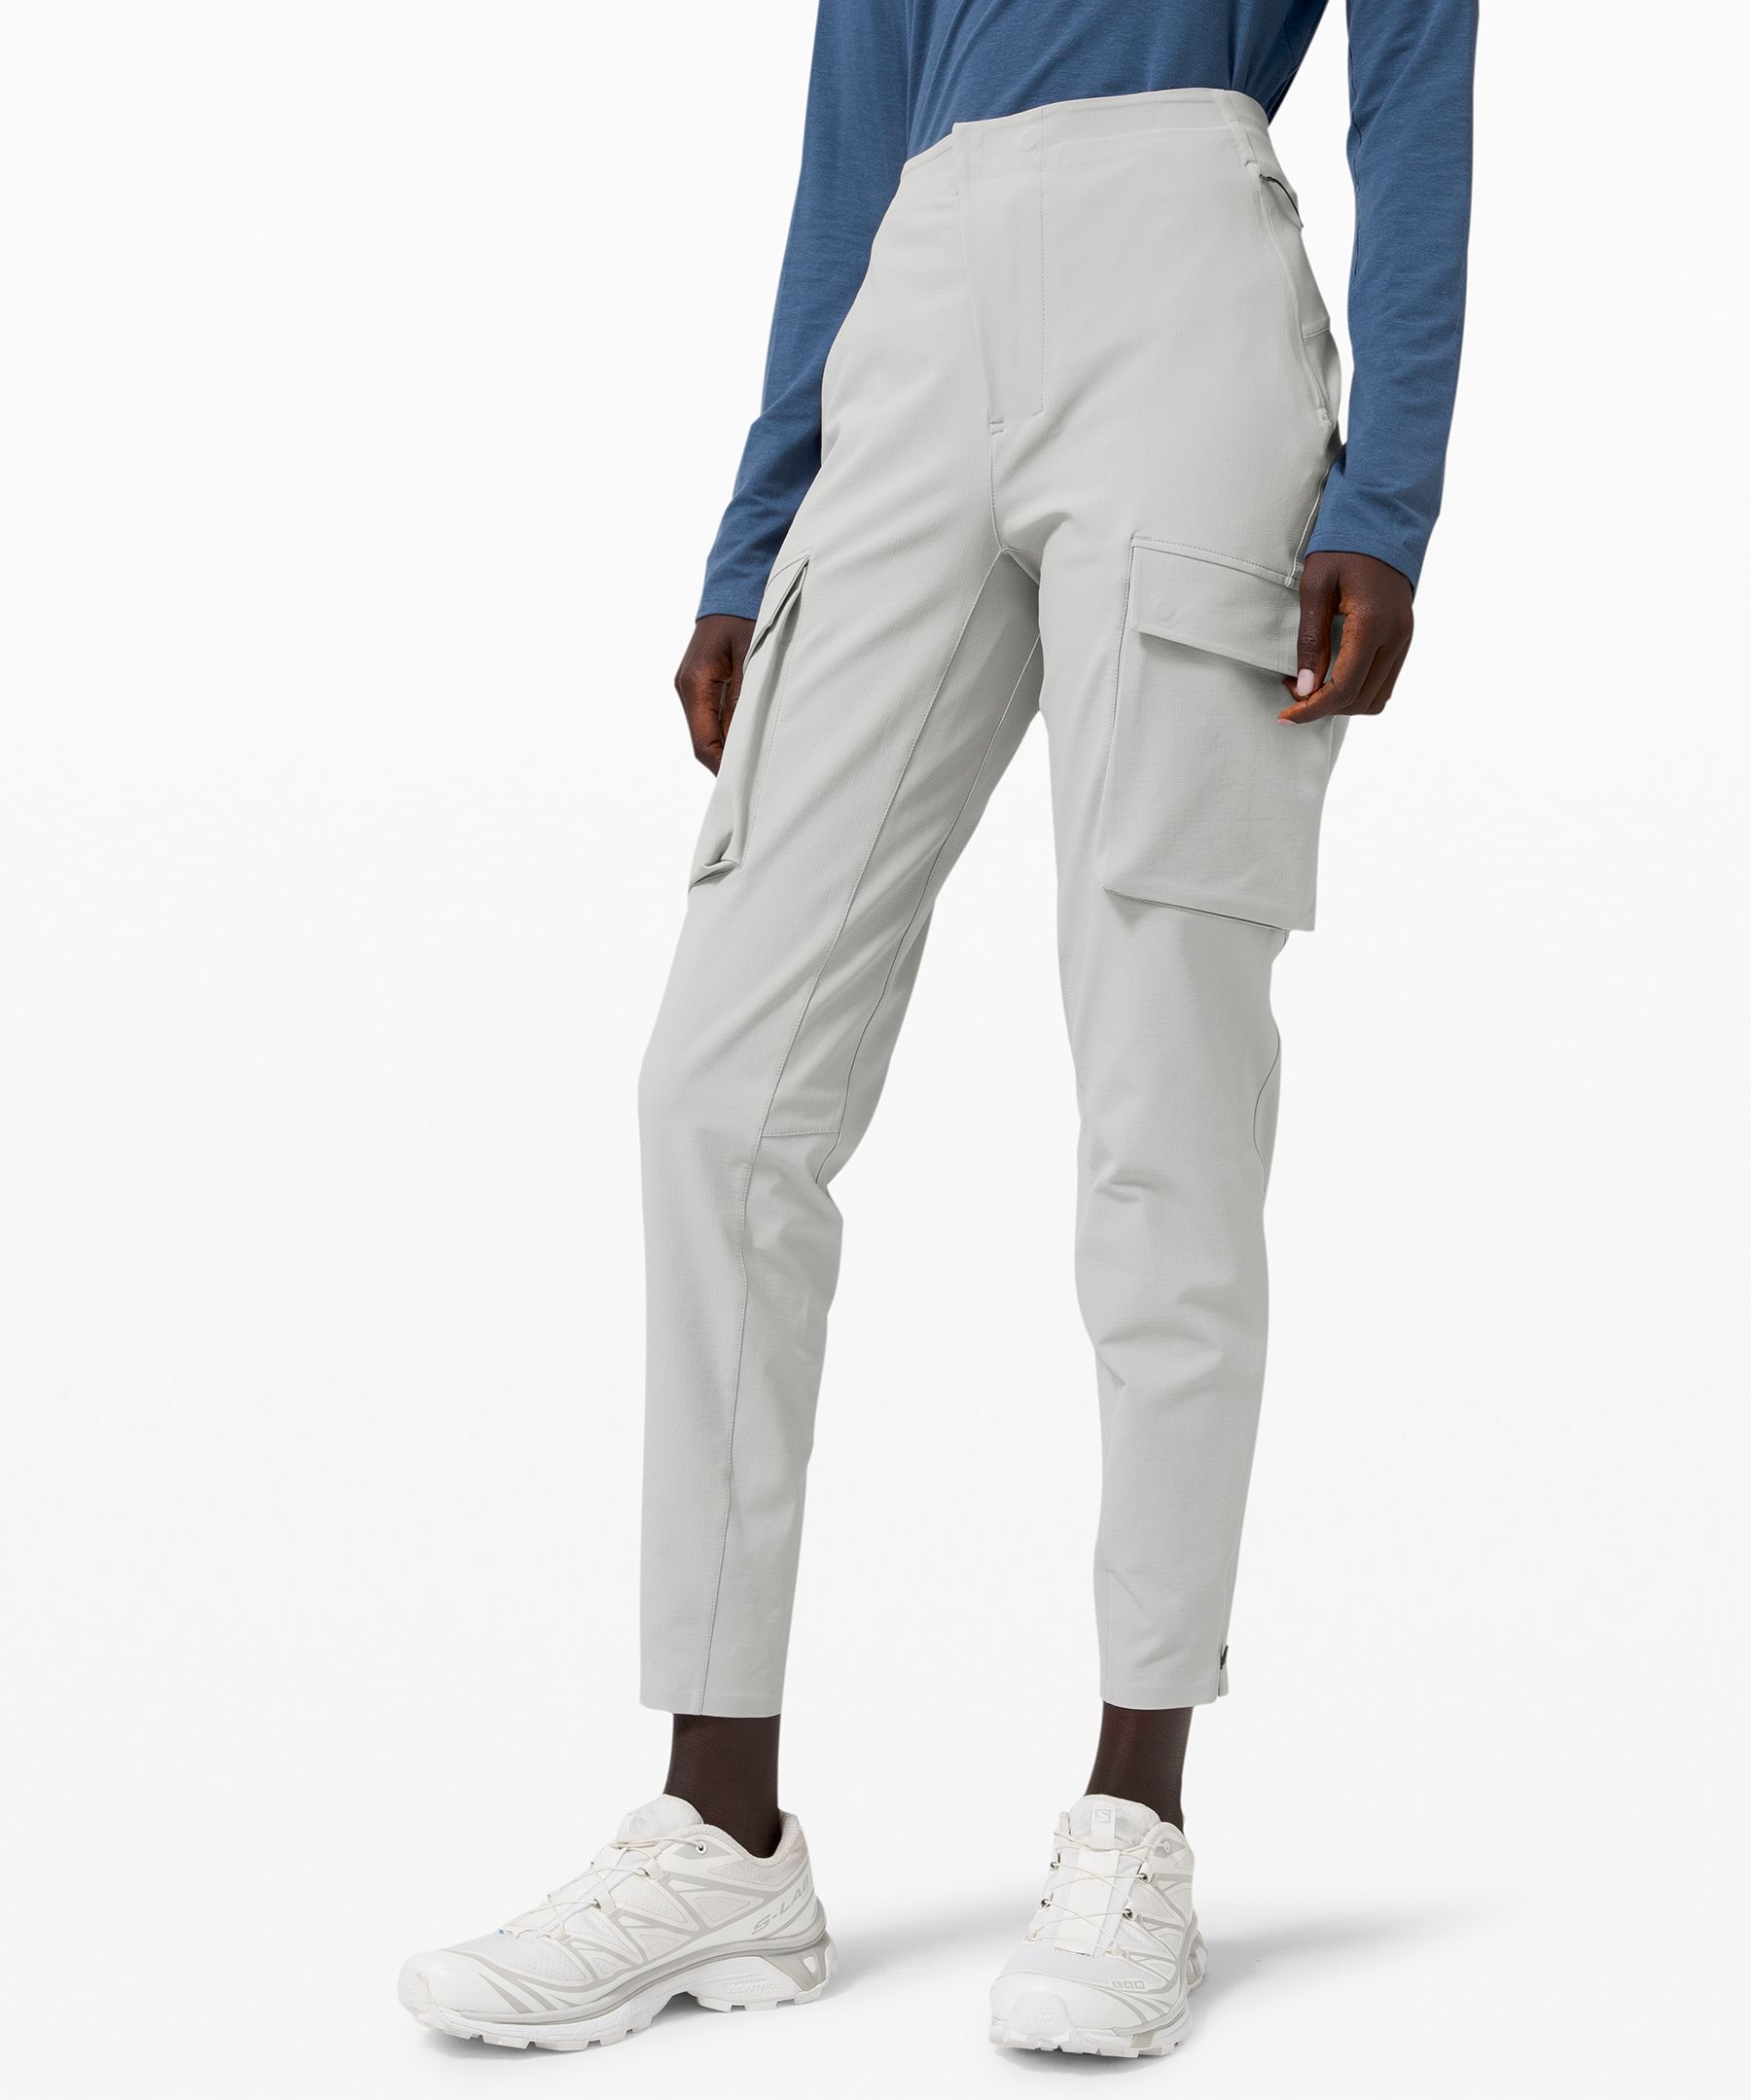 Lululemon Lab Cargo Pants For Women Over 50  International Society of  Precision Agriculture